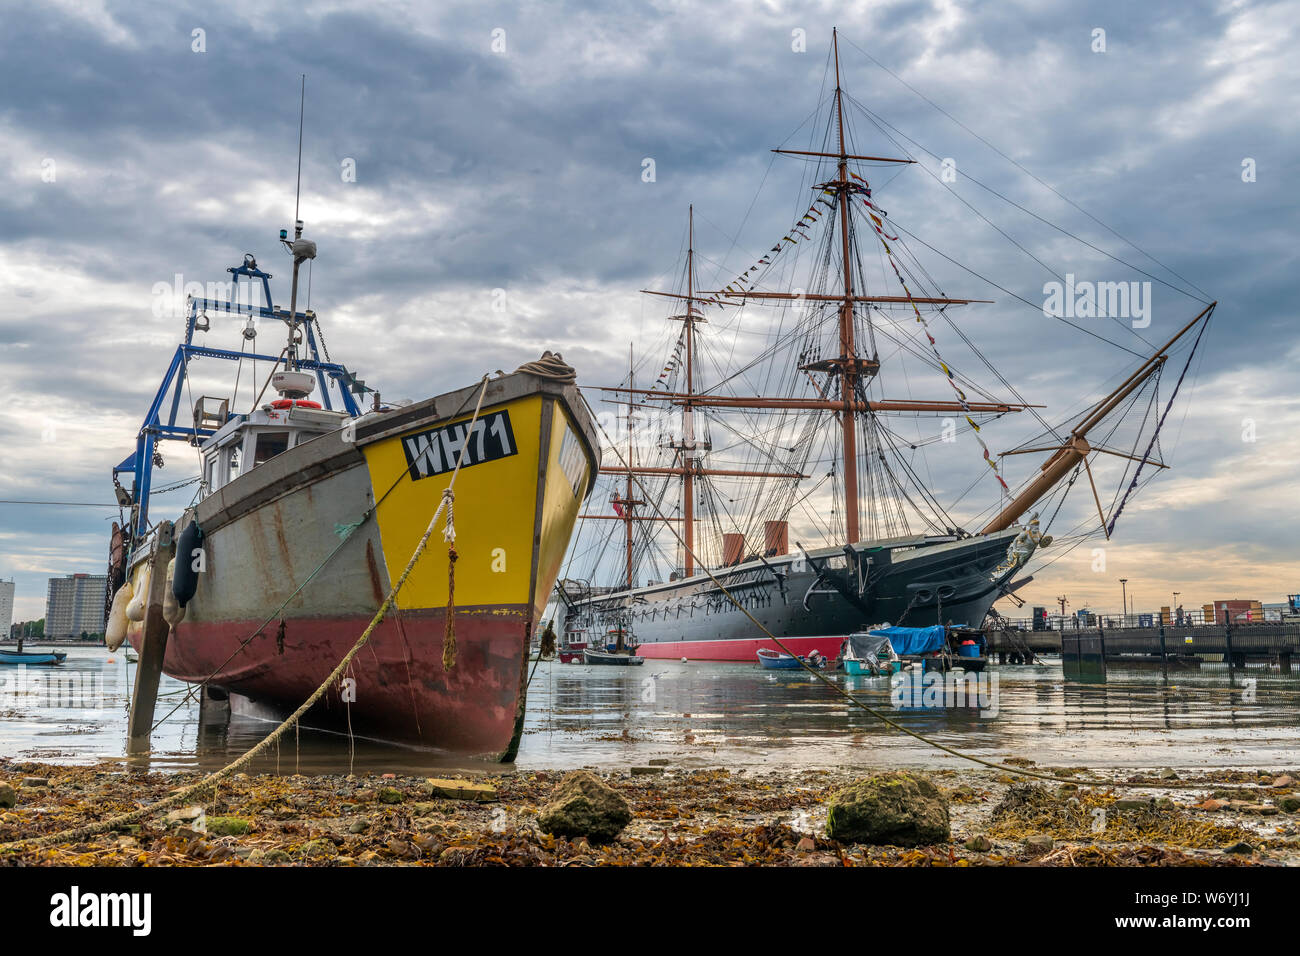 Portsmouth, Hampshire, England. Saturday 3 August 2019. UK Weather. After a warm and humid day in Portsmouth, Hampshire, clouds start to build on the south coast of England as HMS Warrior basks in the intermittent hazy sunshine. Warrior was the largest, fastest and most powerful warship in the Royal Navy when launched in 1860. Stock Photo